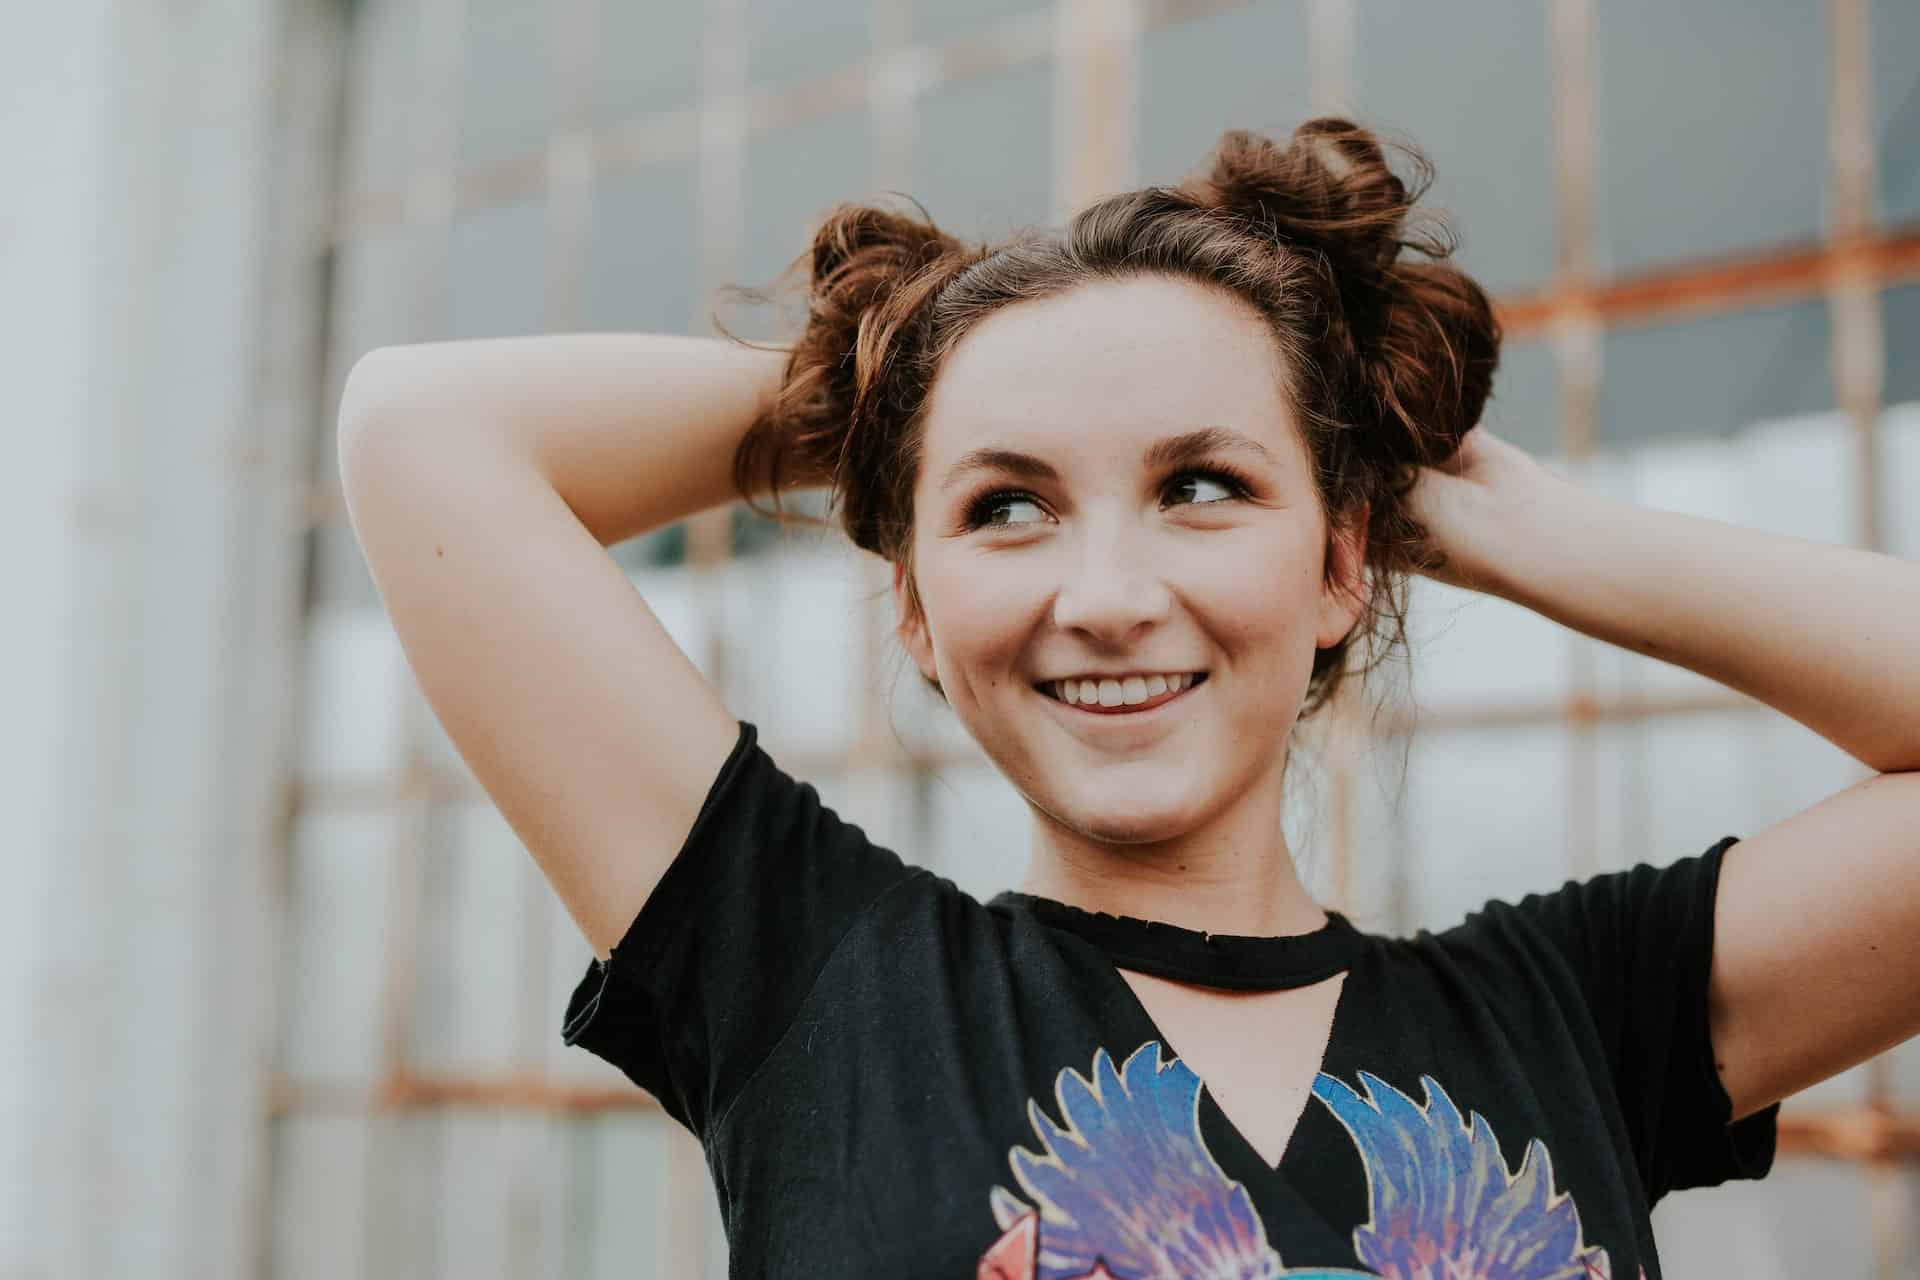 Young woman with her hair in two buns smiling